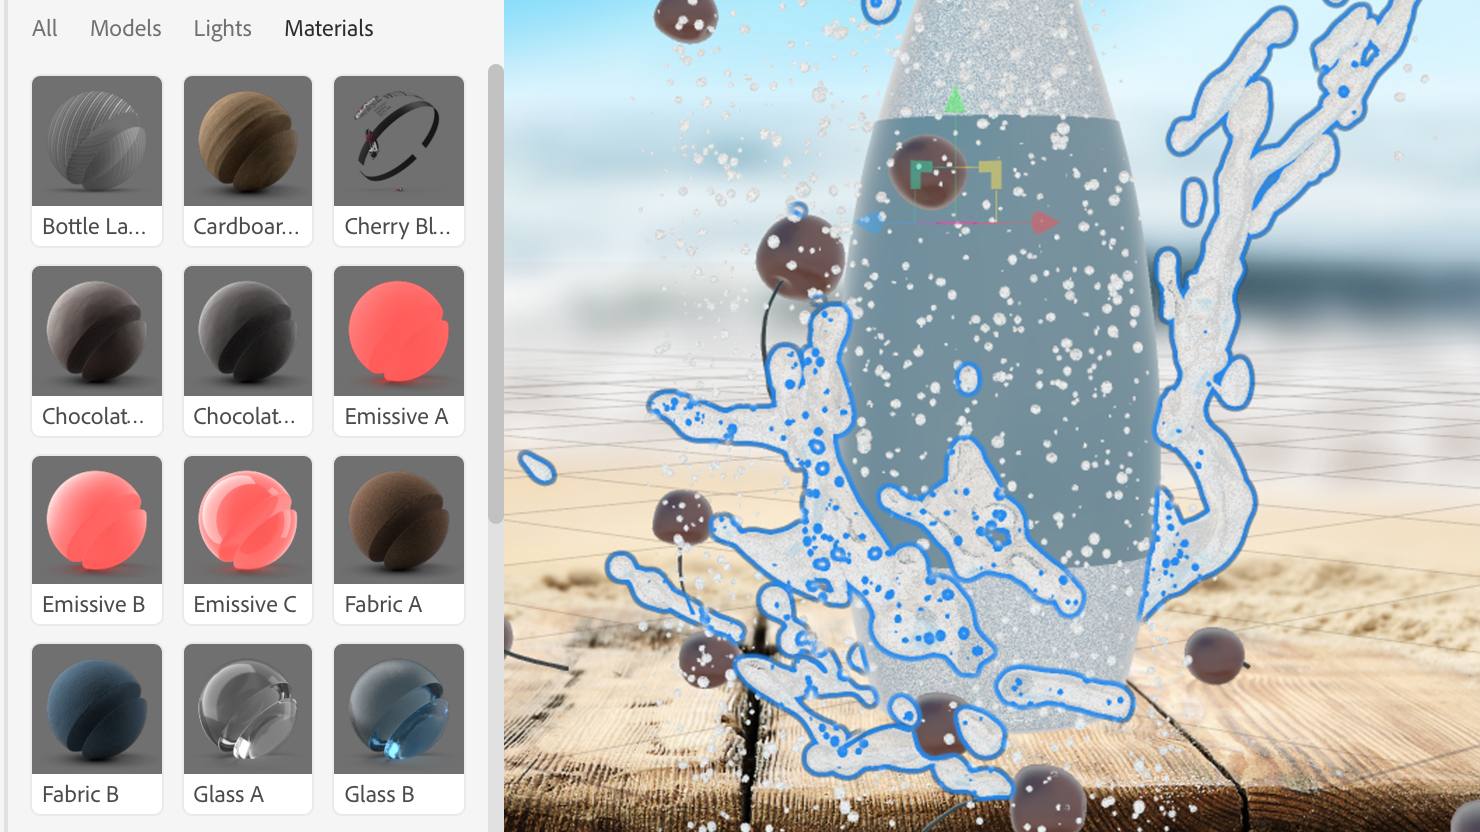 Adobe’s Experimental 3D App Adds A New Dimension To Photoshop